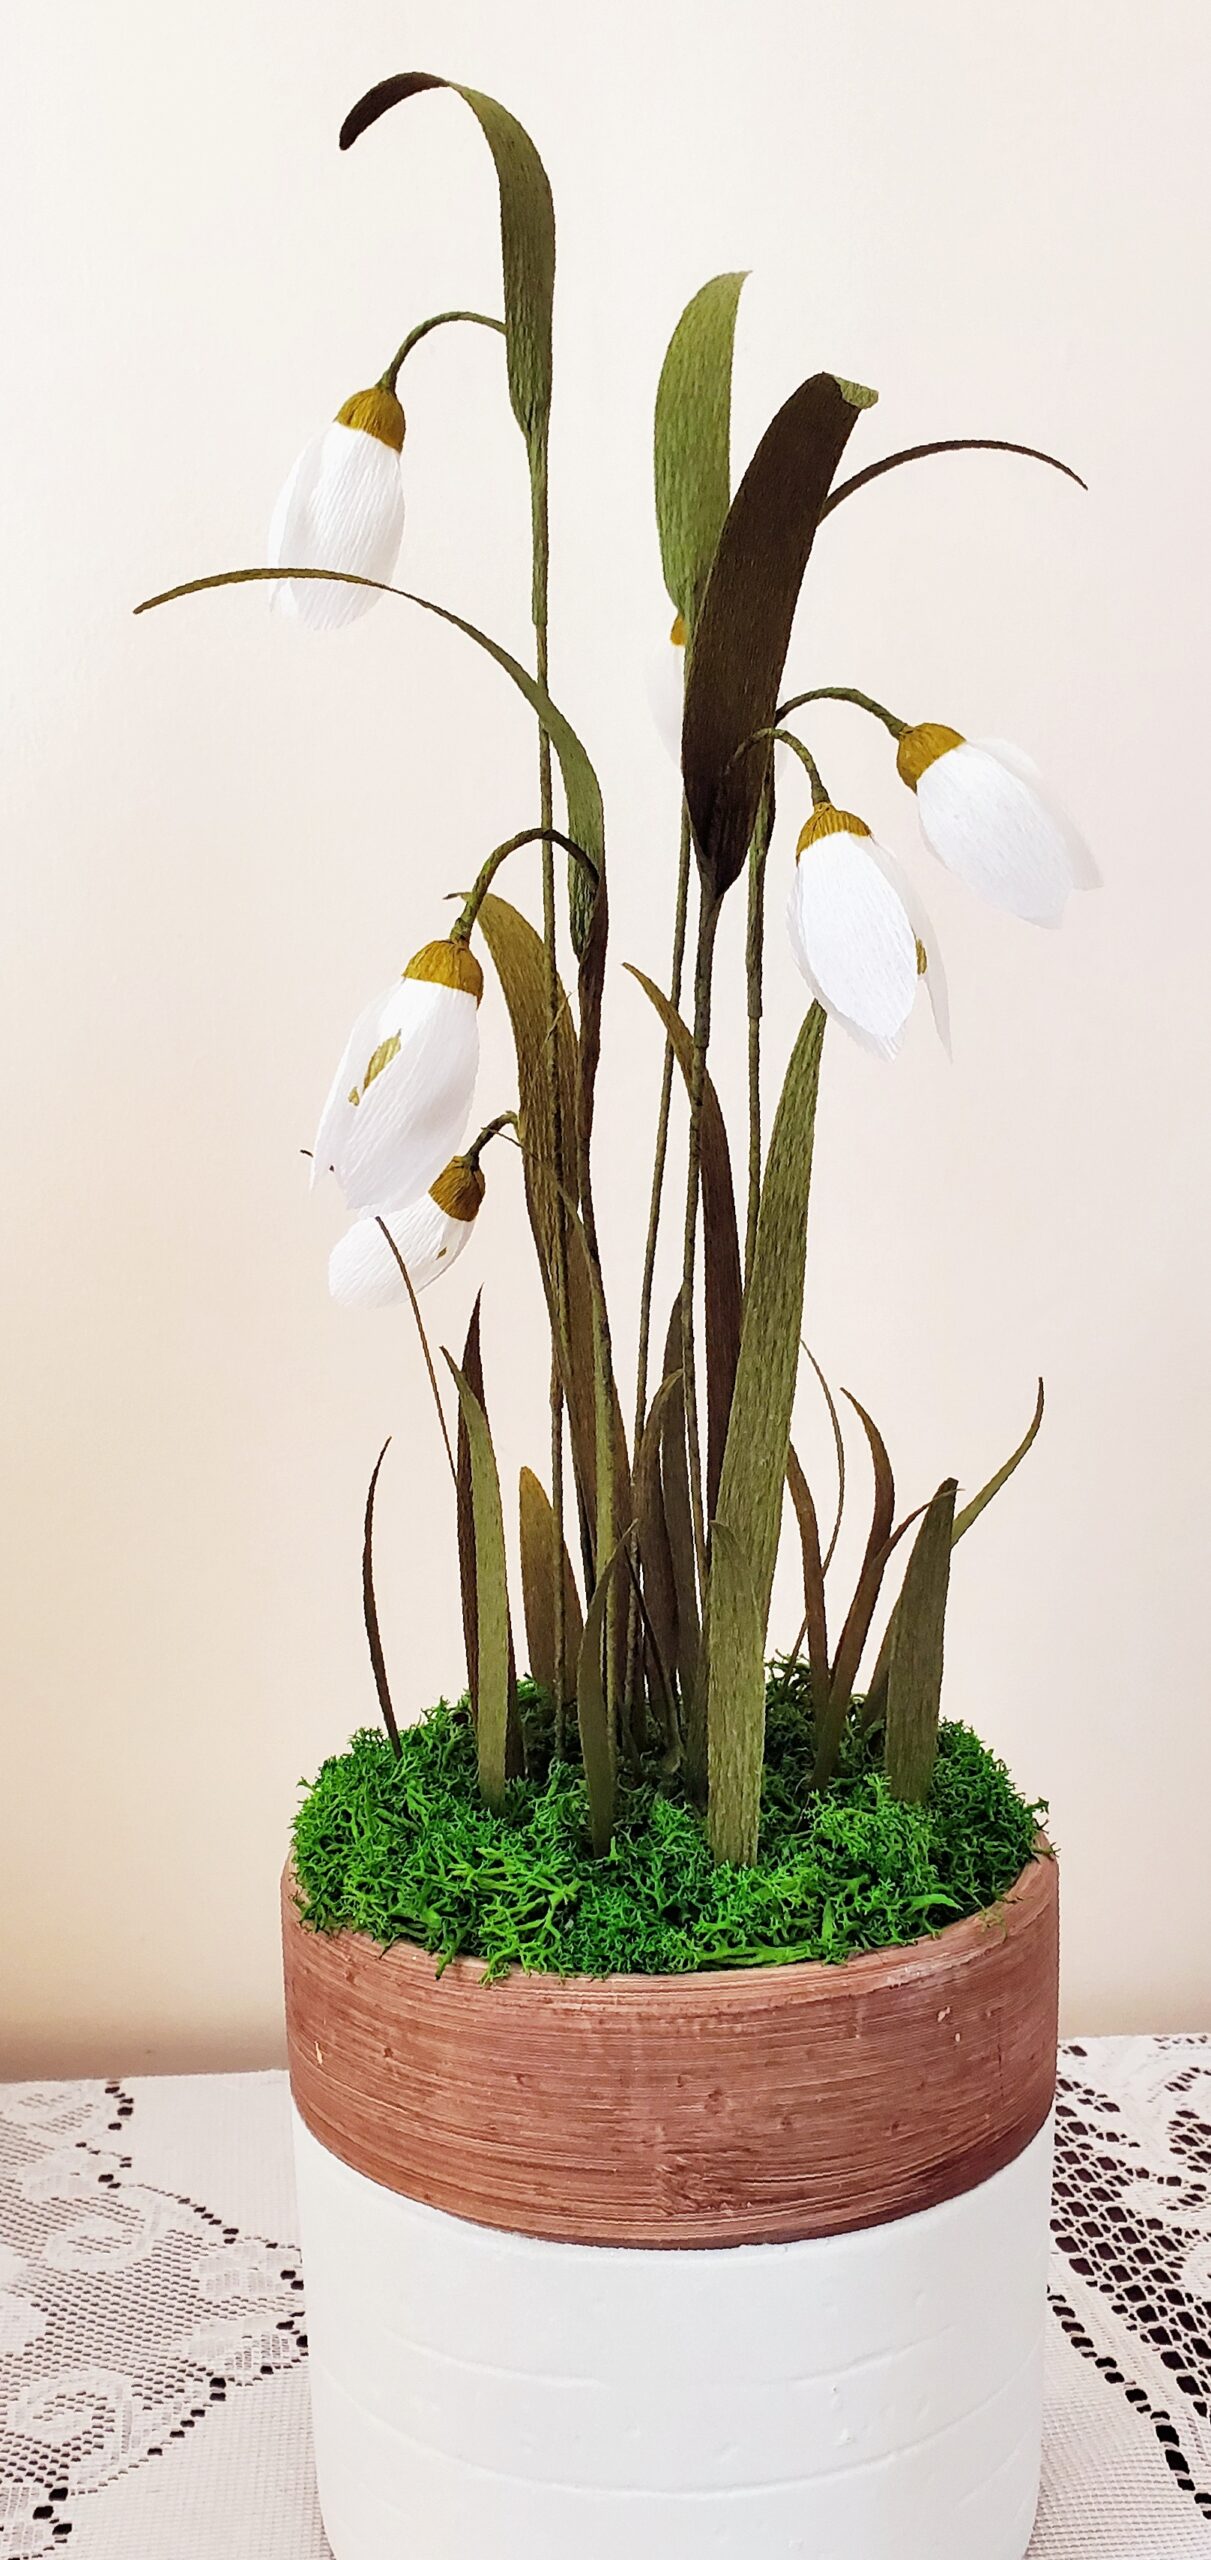 Potted Snowdrops